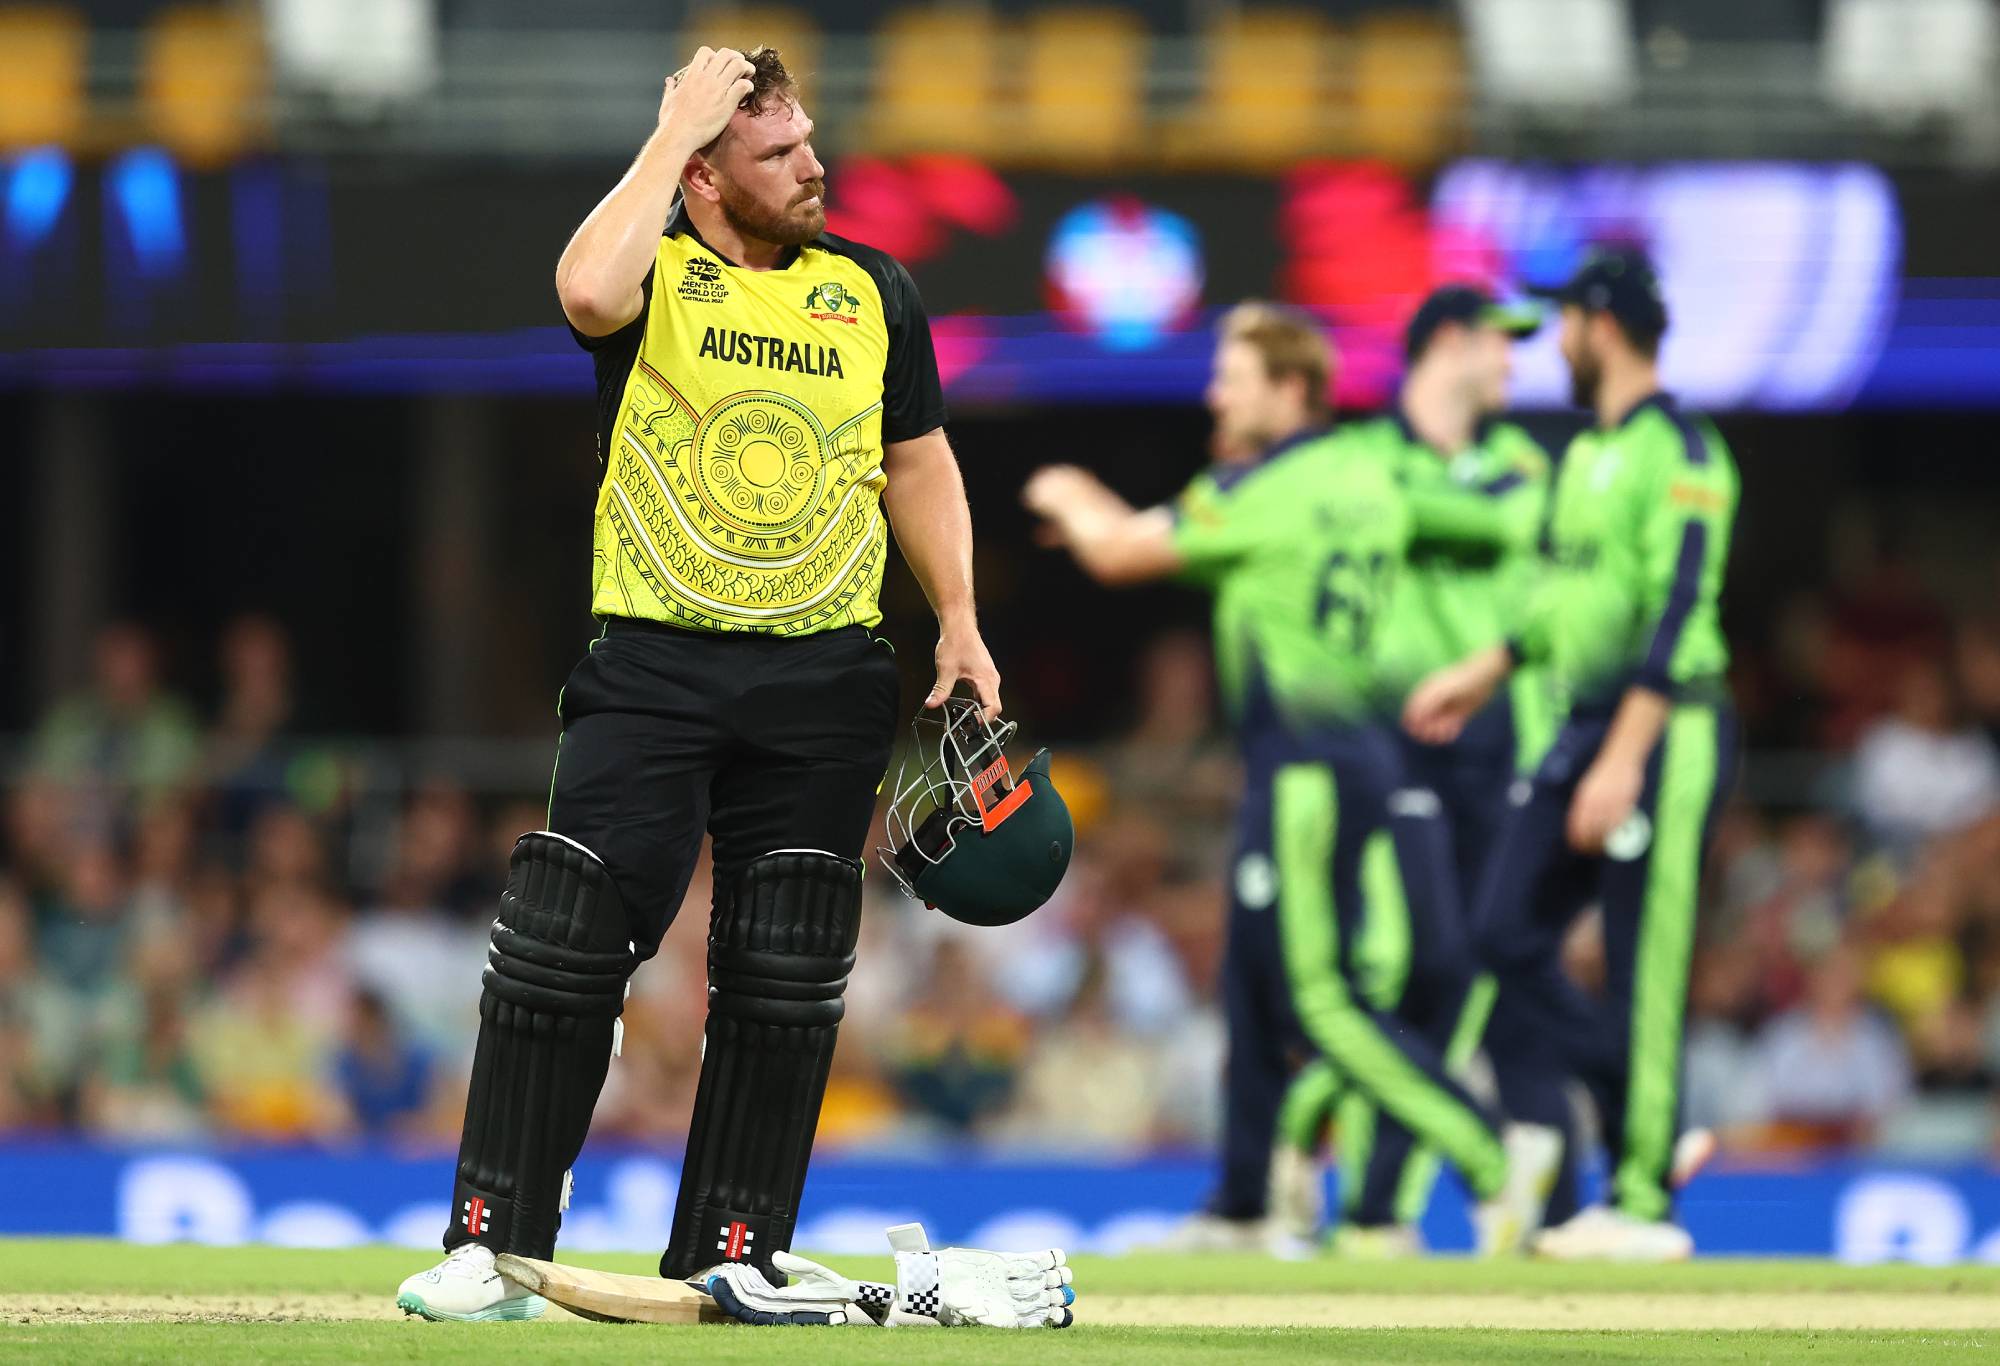 BRISBANE, AUSTRALIA - OCTOBER 31: Aaron Finch of Australia reacts after the wicket of Mitchell Marsh of Australia during the ICC Men's T20 World Cup match between Australia and Ireland at The Gabba on October 31, 2022 in Brisbane, Australia. (Photo by Chris Hyde-ICC/ICC via Getty Images)